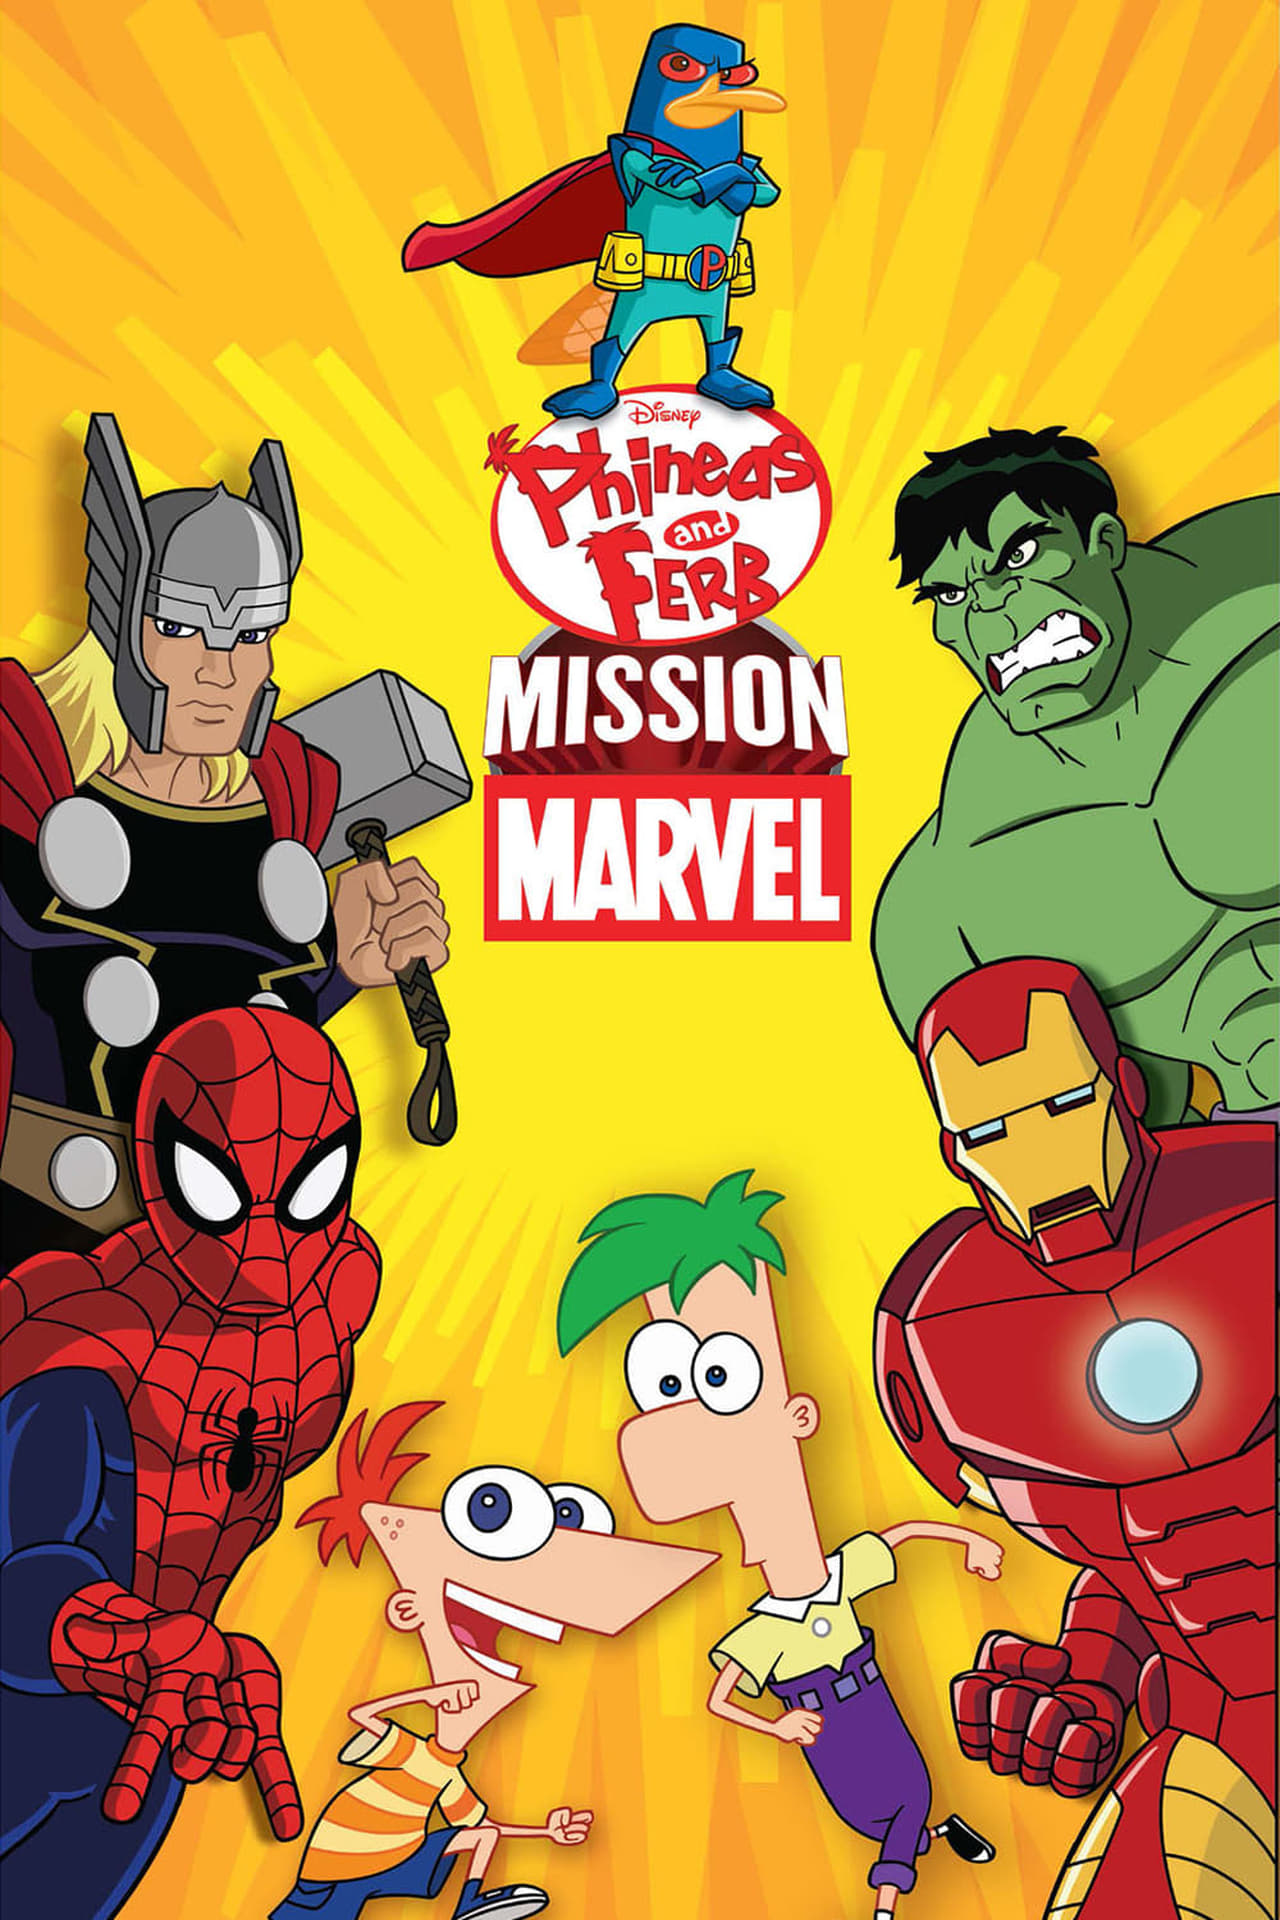 Phineas and Ferb: Mission Marvel (2013) 128Kbps 23.976Fps 48Khz 2.0Ch Disney+ DD+ E-AC3 Turkish Audio TAC